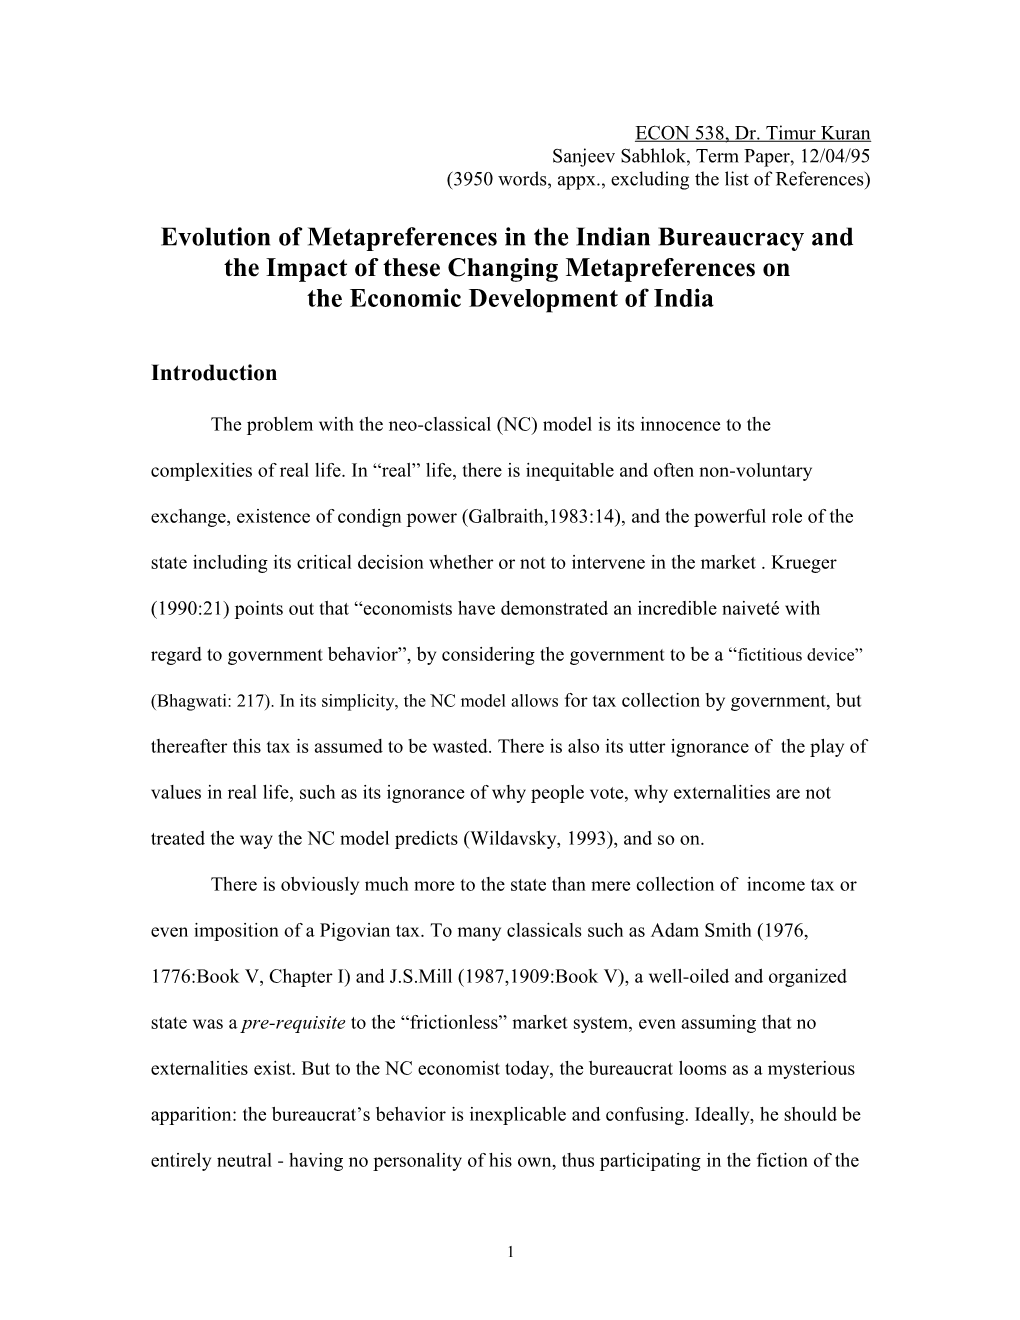 Evolution of Metapreferences in the Indian Bureaucracy And